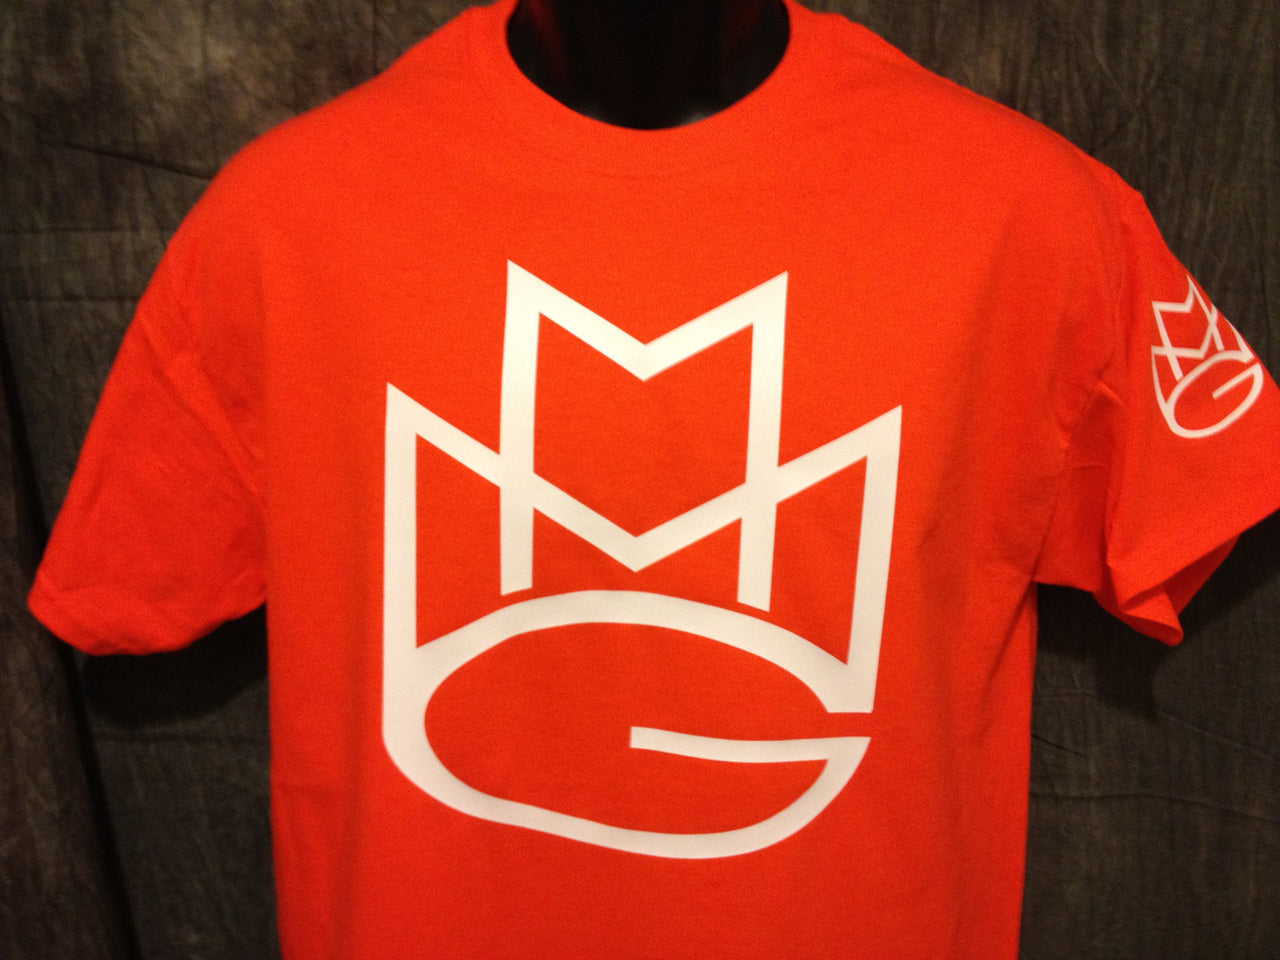 Maybach Music Group Limited Edition Tshirt: Orange with White and Black Print - TshirtNow.net - 2